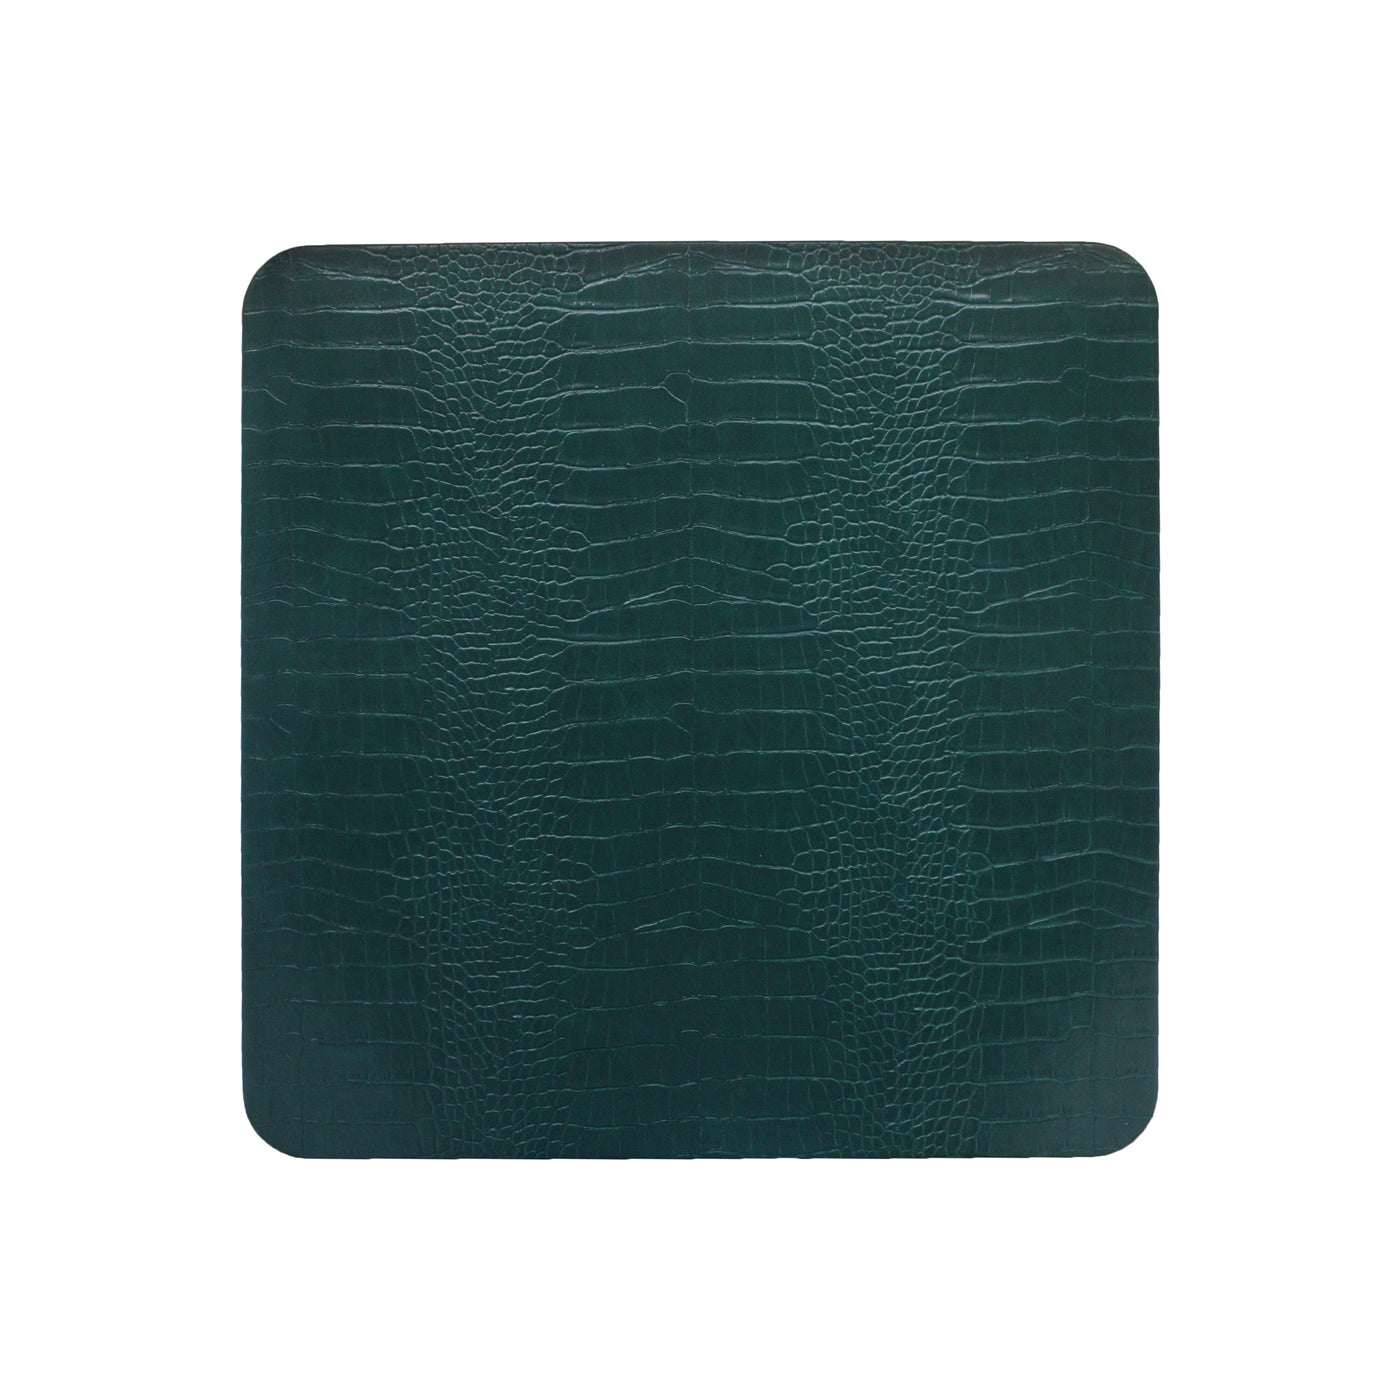 Green Square Embossed Placemat Green Plaid Table Set for Fall Chefanie 